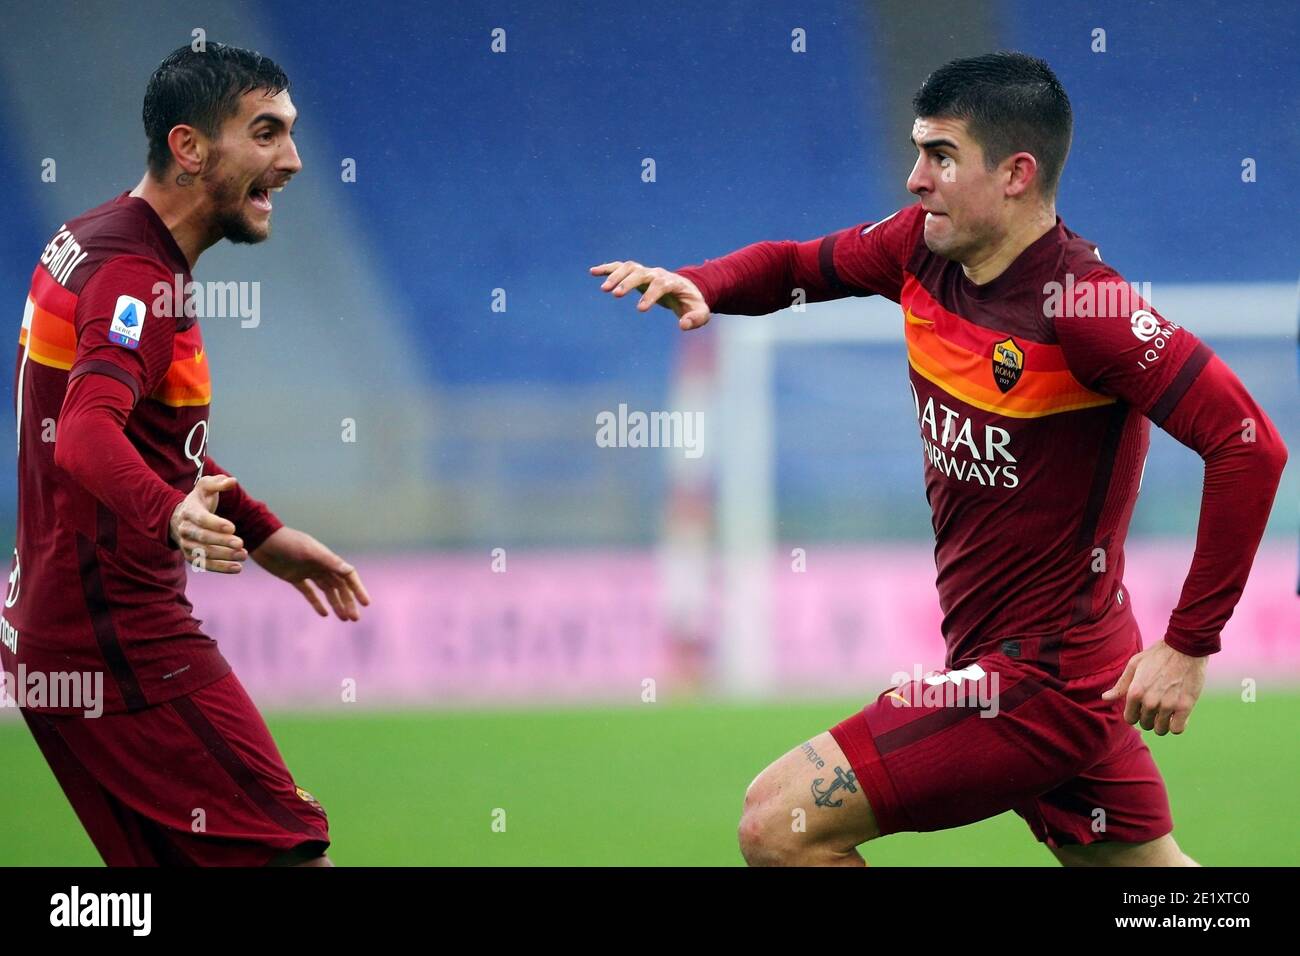 Gianluca Mancini Of Roma R Celebrates With Lorenzo Pellegrini L After Scoring 2 2 Goal During The Italian Championship Serie A Football Match Between As Roma And Fc Internazionale On January 10 21